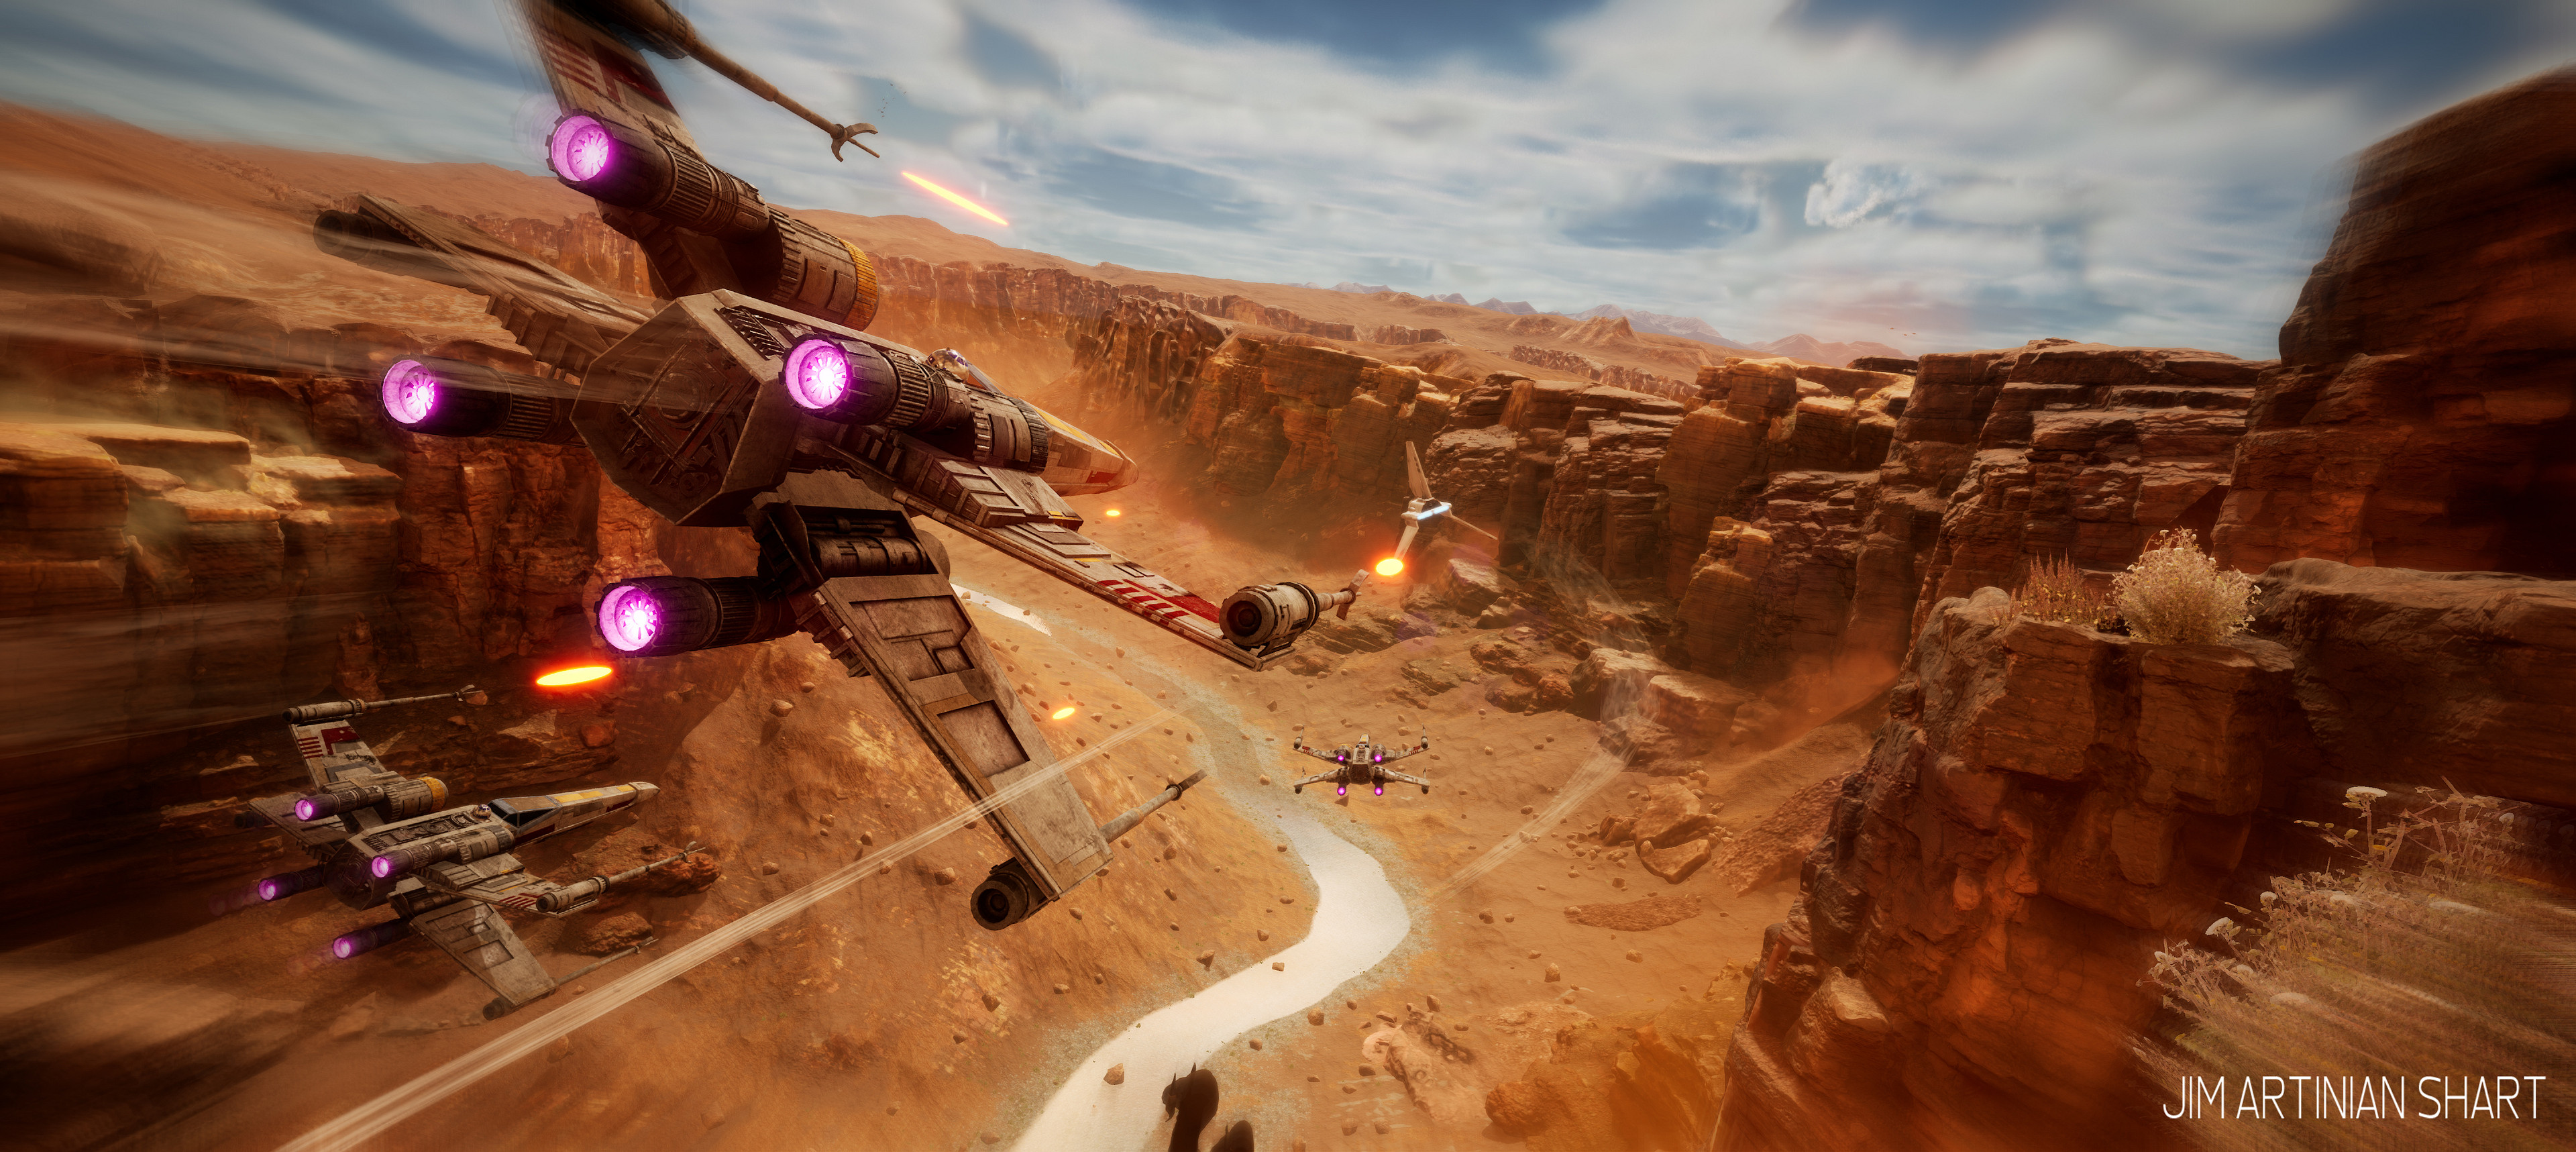 X Wing Imperial Shuttle Box Canyon 3840x1717